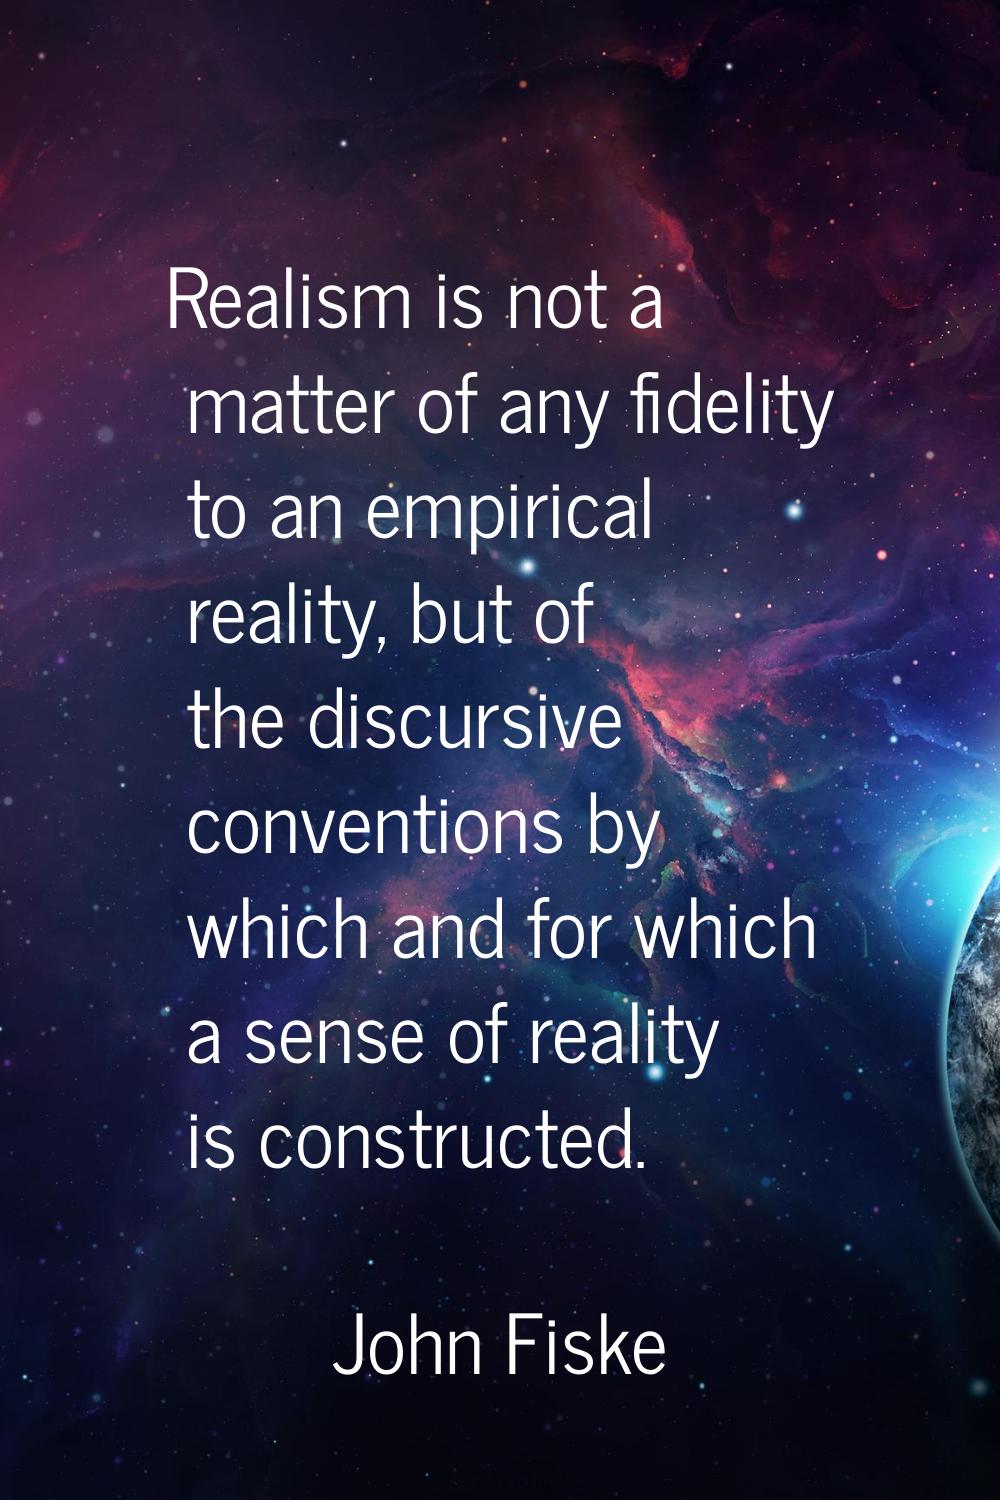 Realism is not a matter of any fidelity to an empirical reality, but of the discursive conventions 